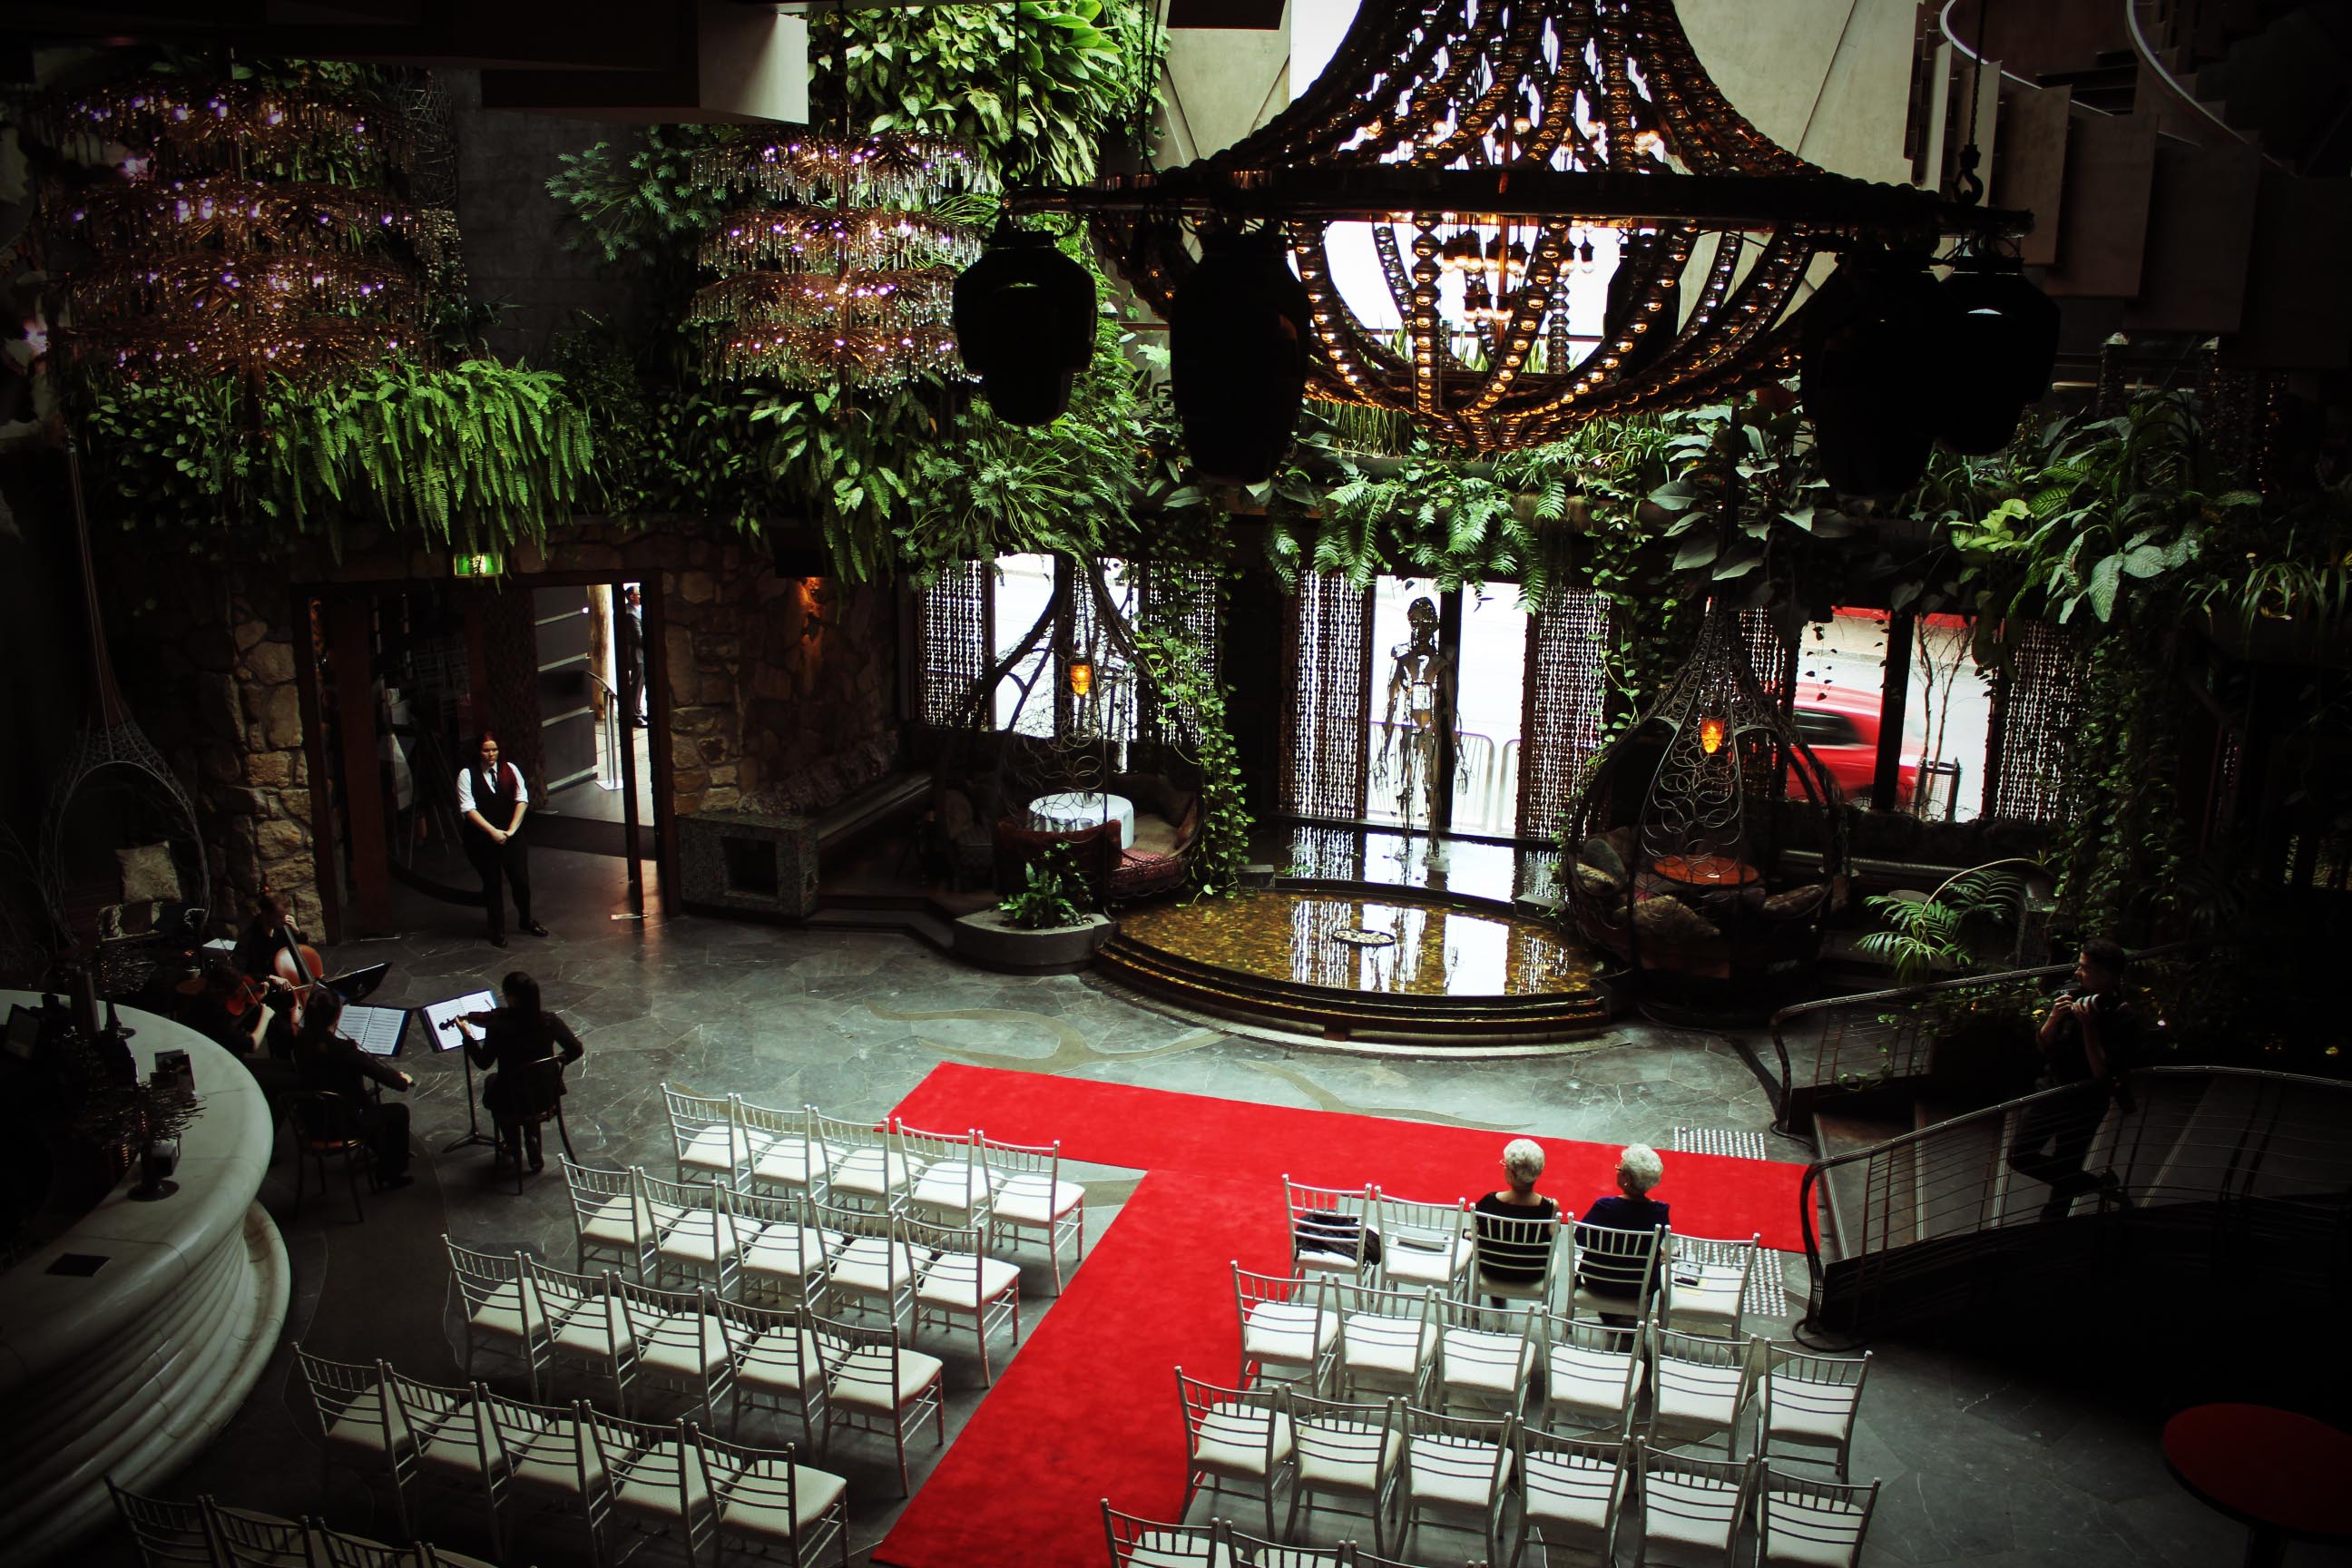 The ceremony setting at Cloudland looked truly magical